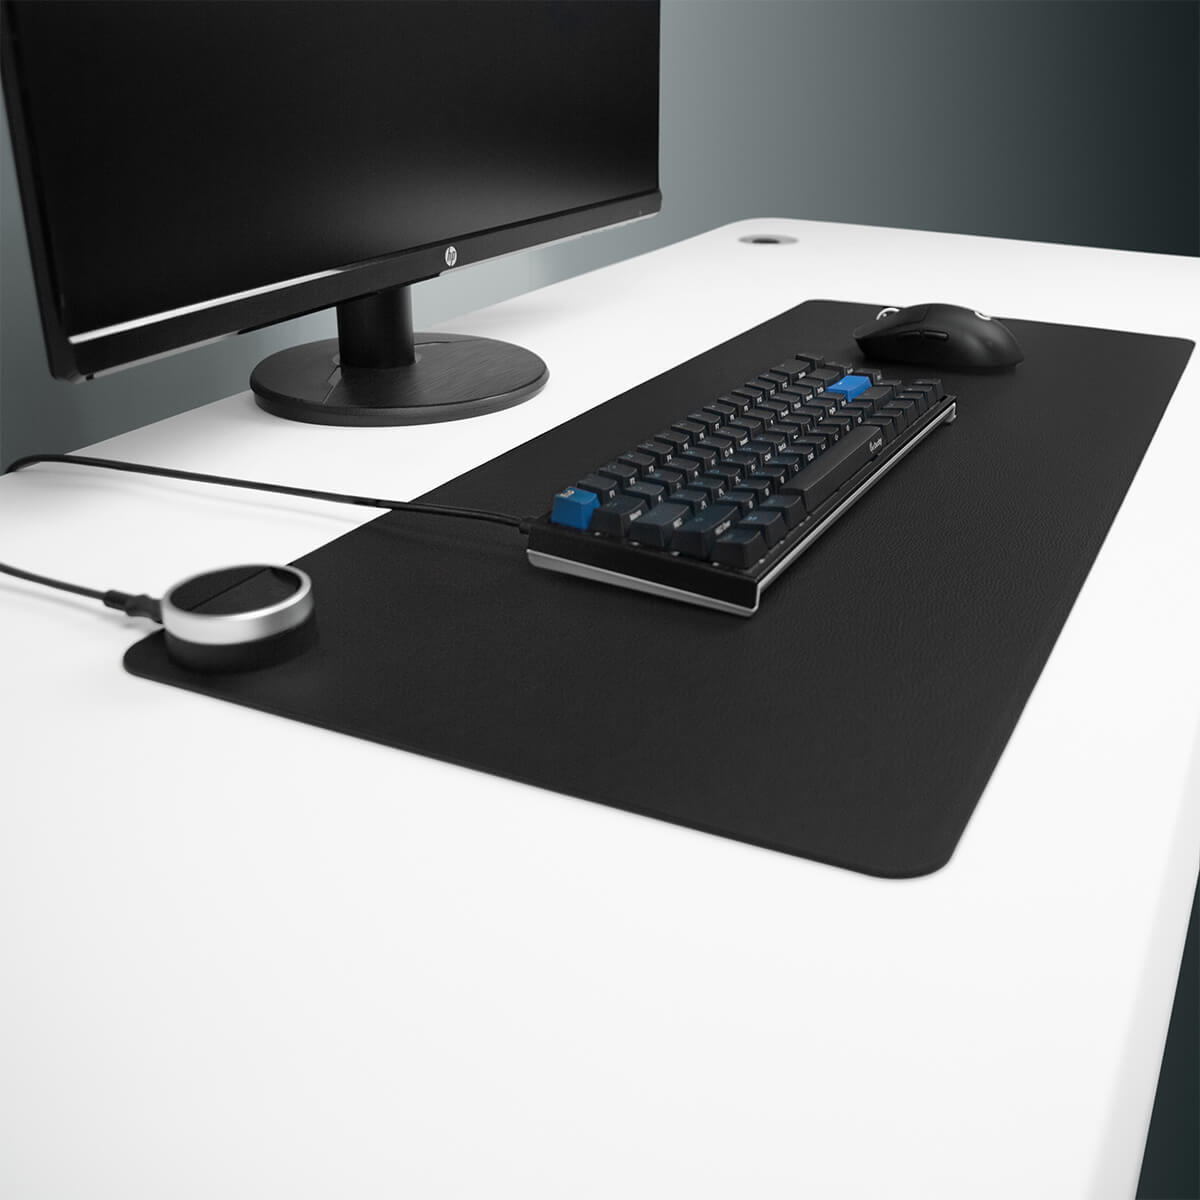 Heiheiup Heated Pads Warm Desk Pad Winter Warmer Office Desk Mat 3 Speeds  Touching Control Warm Big Pad For Office Home Gamer Desktop Big Gaming Pad  Heated Desk Pad Chest Workout Equipment